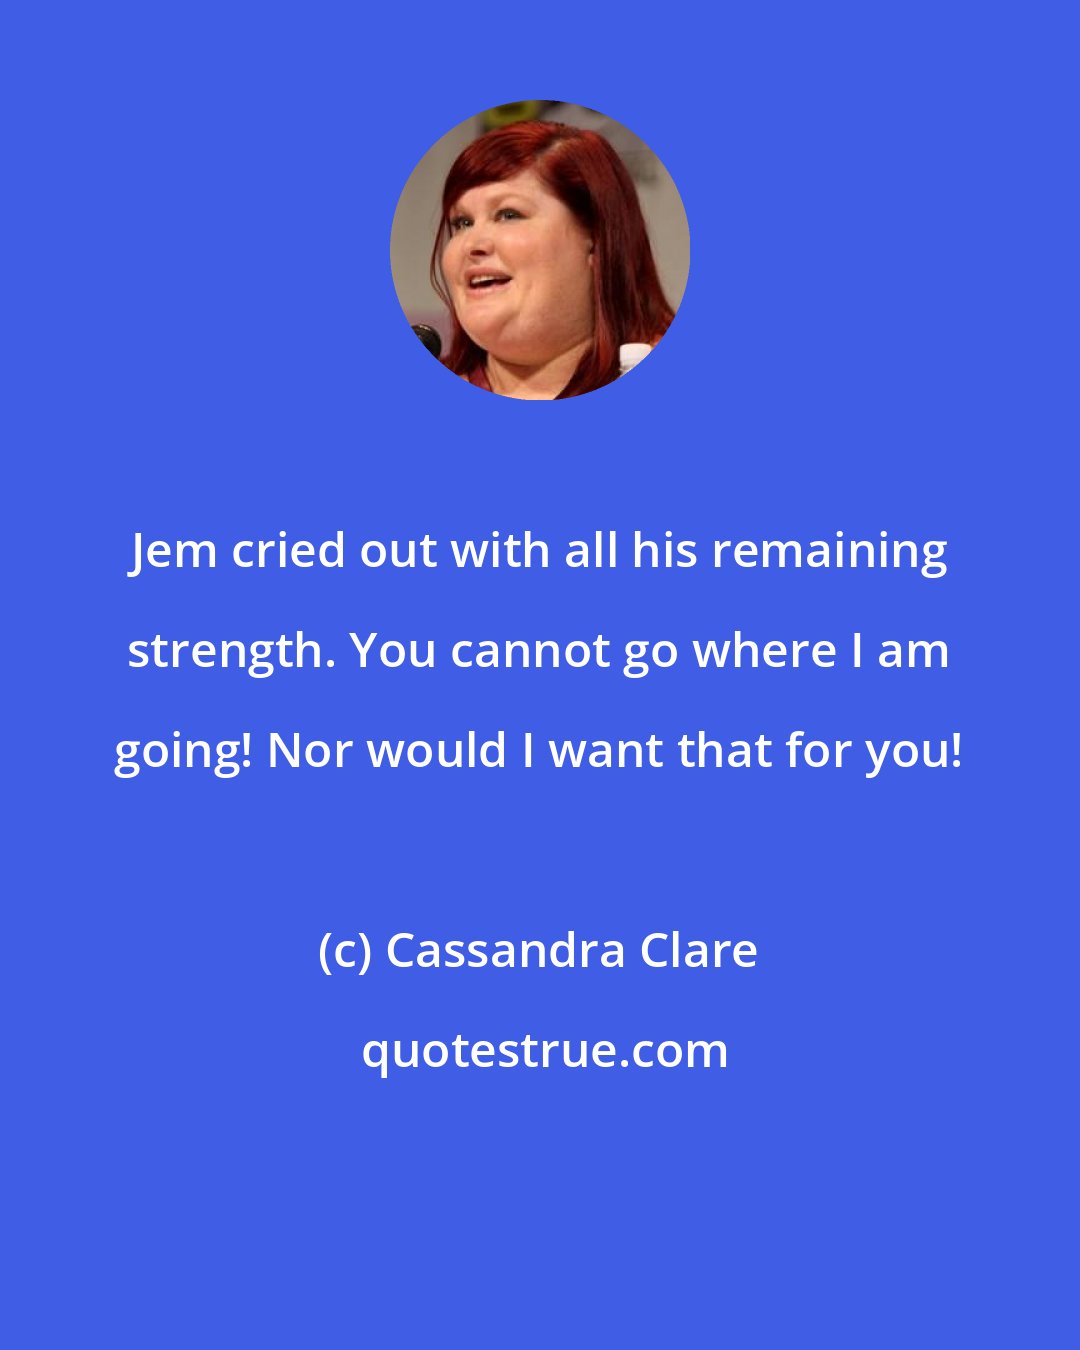 Cassandra Clare: Jem cried out with all his remaining strength. You cannot go where I am going! Nor would I want that for you!